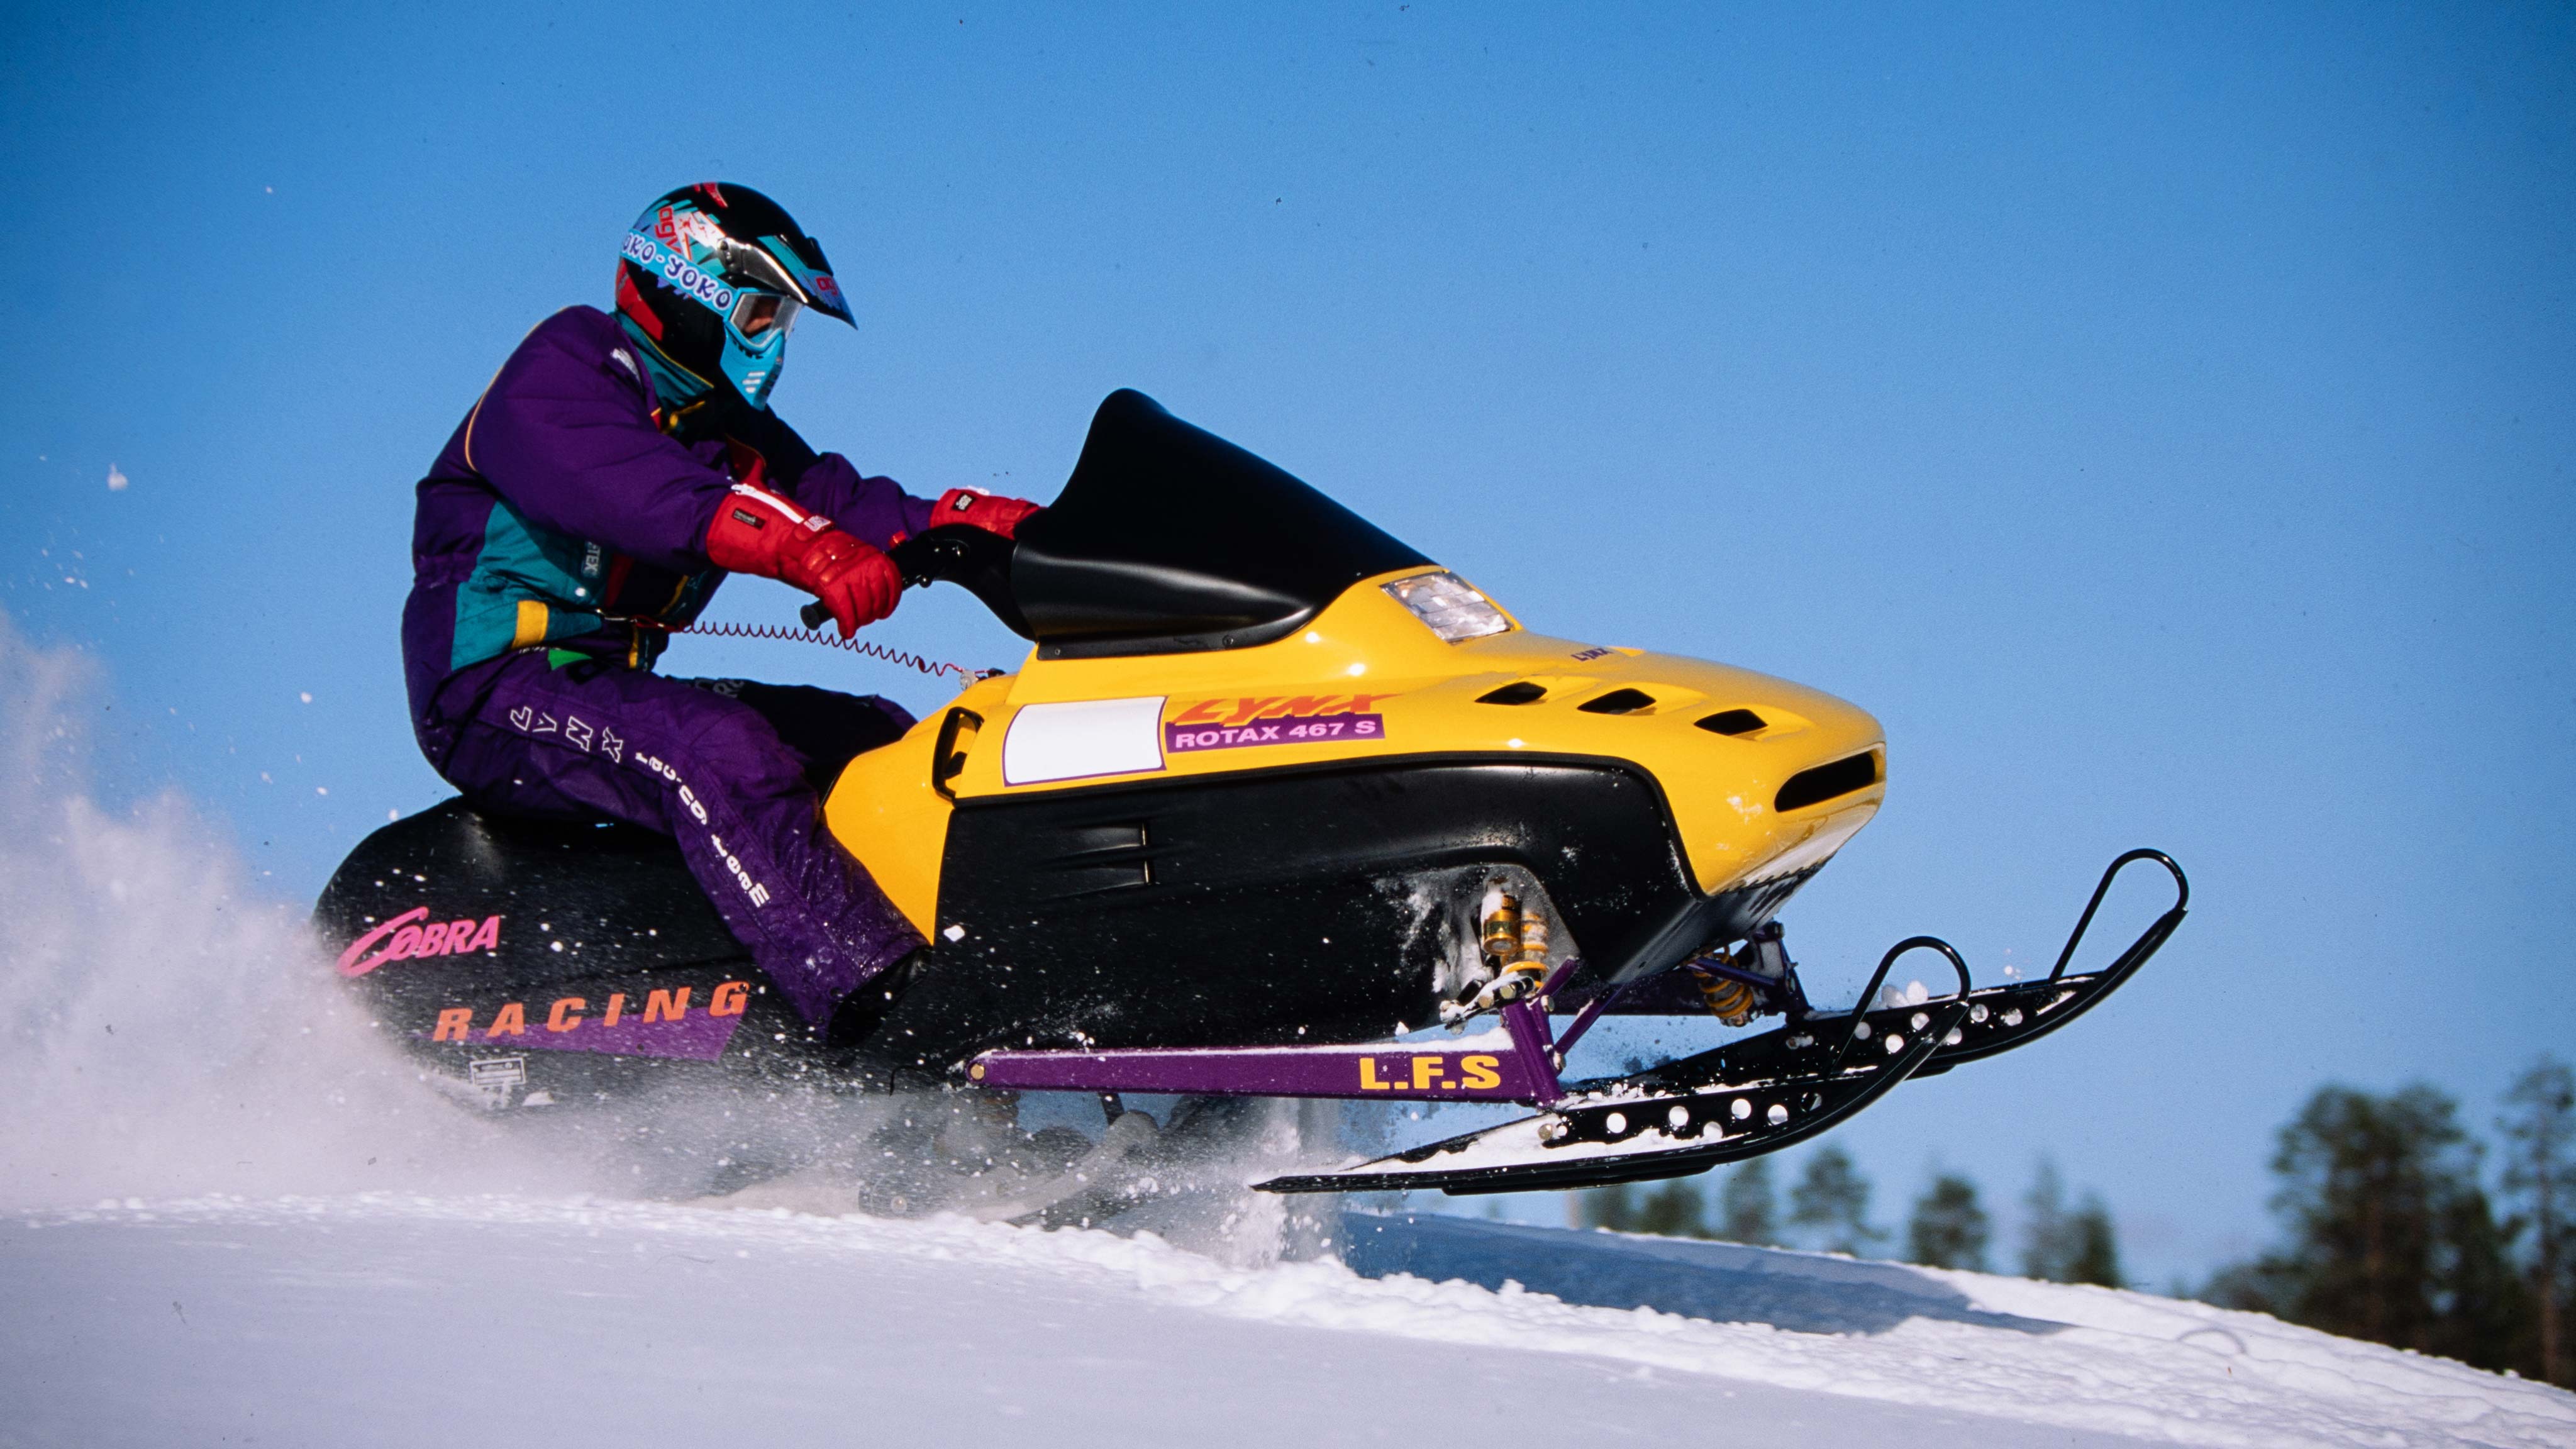 Rider accelerating with Lynx Cobra Racing snowmobile